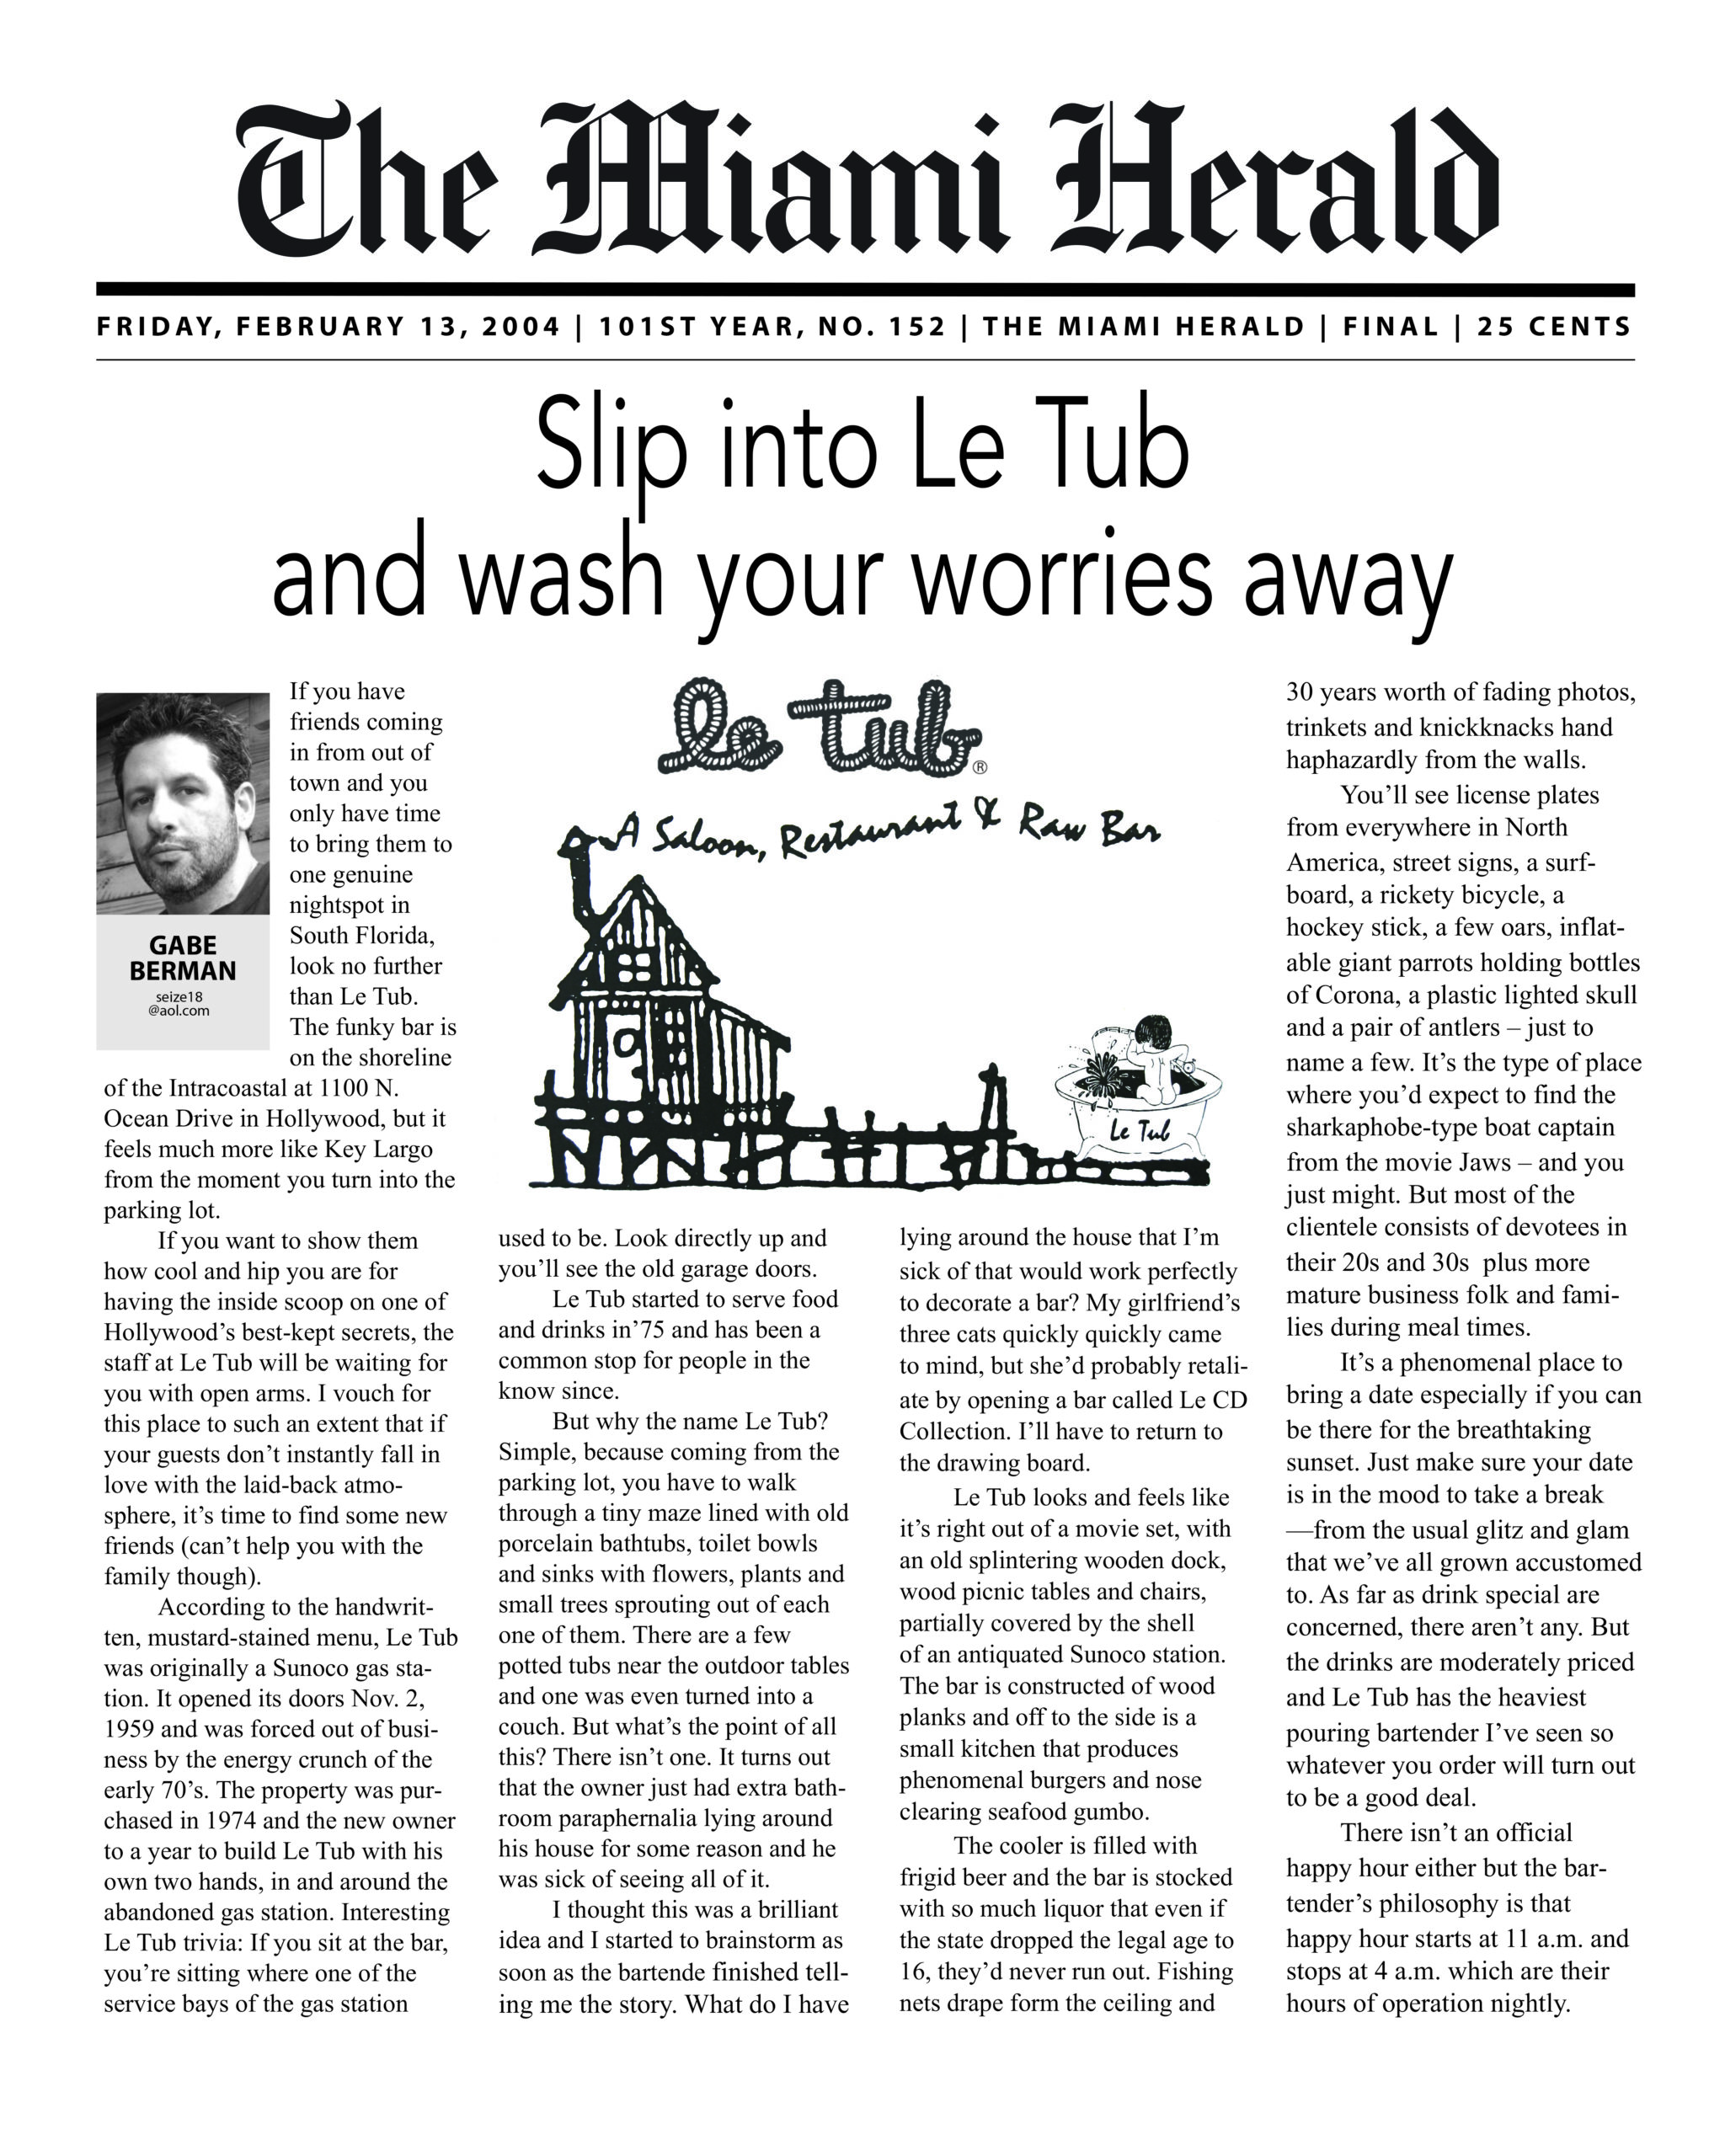 Slip into Le Tub and wash your worries away, Miami Herald, 2004